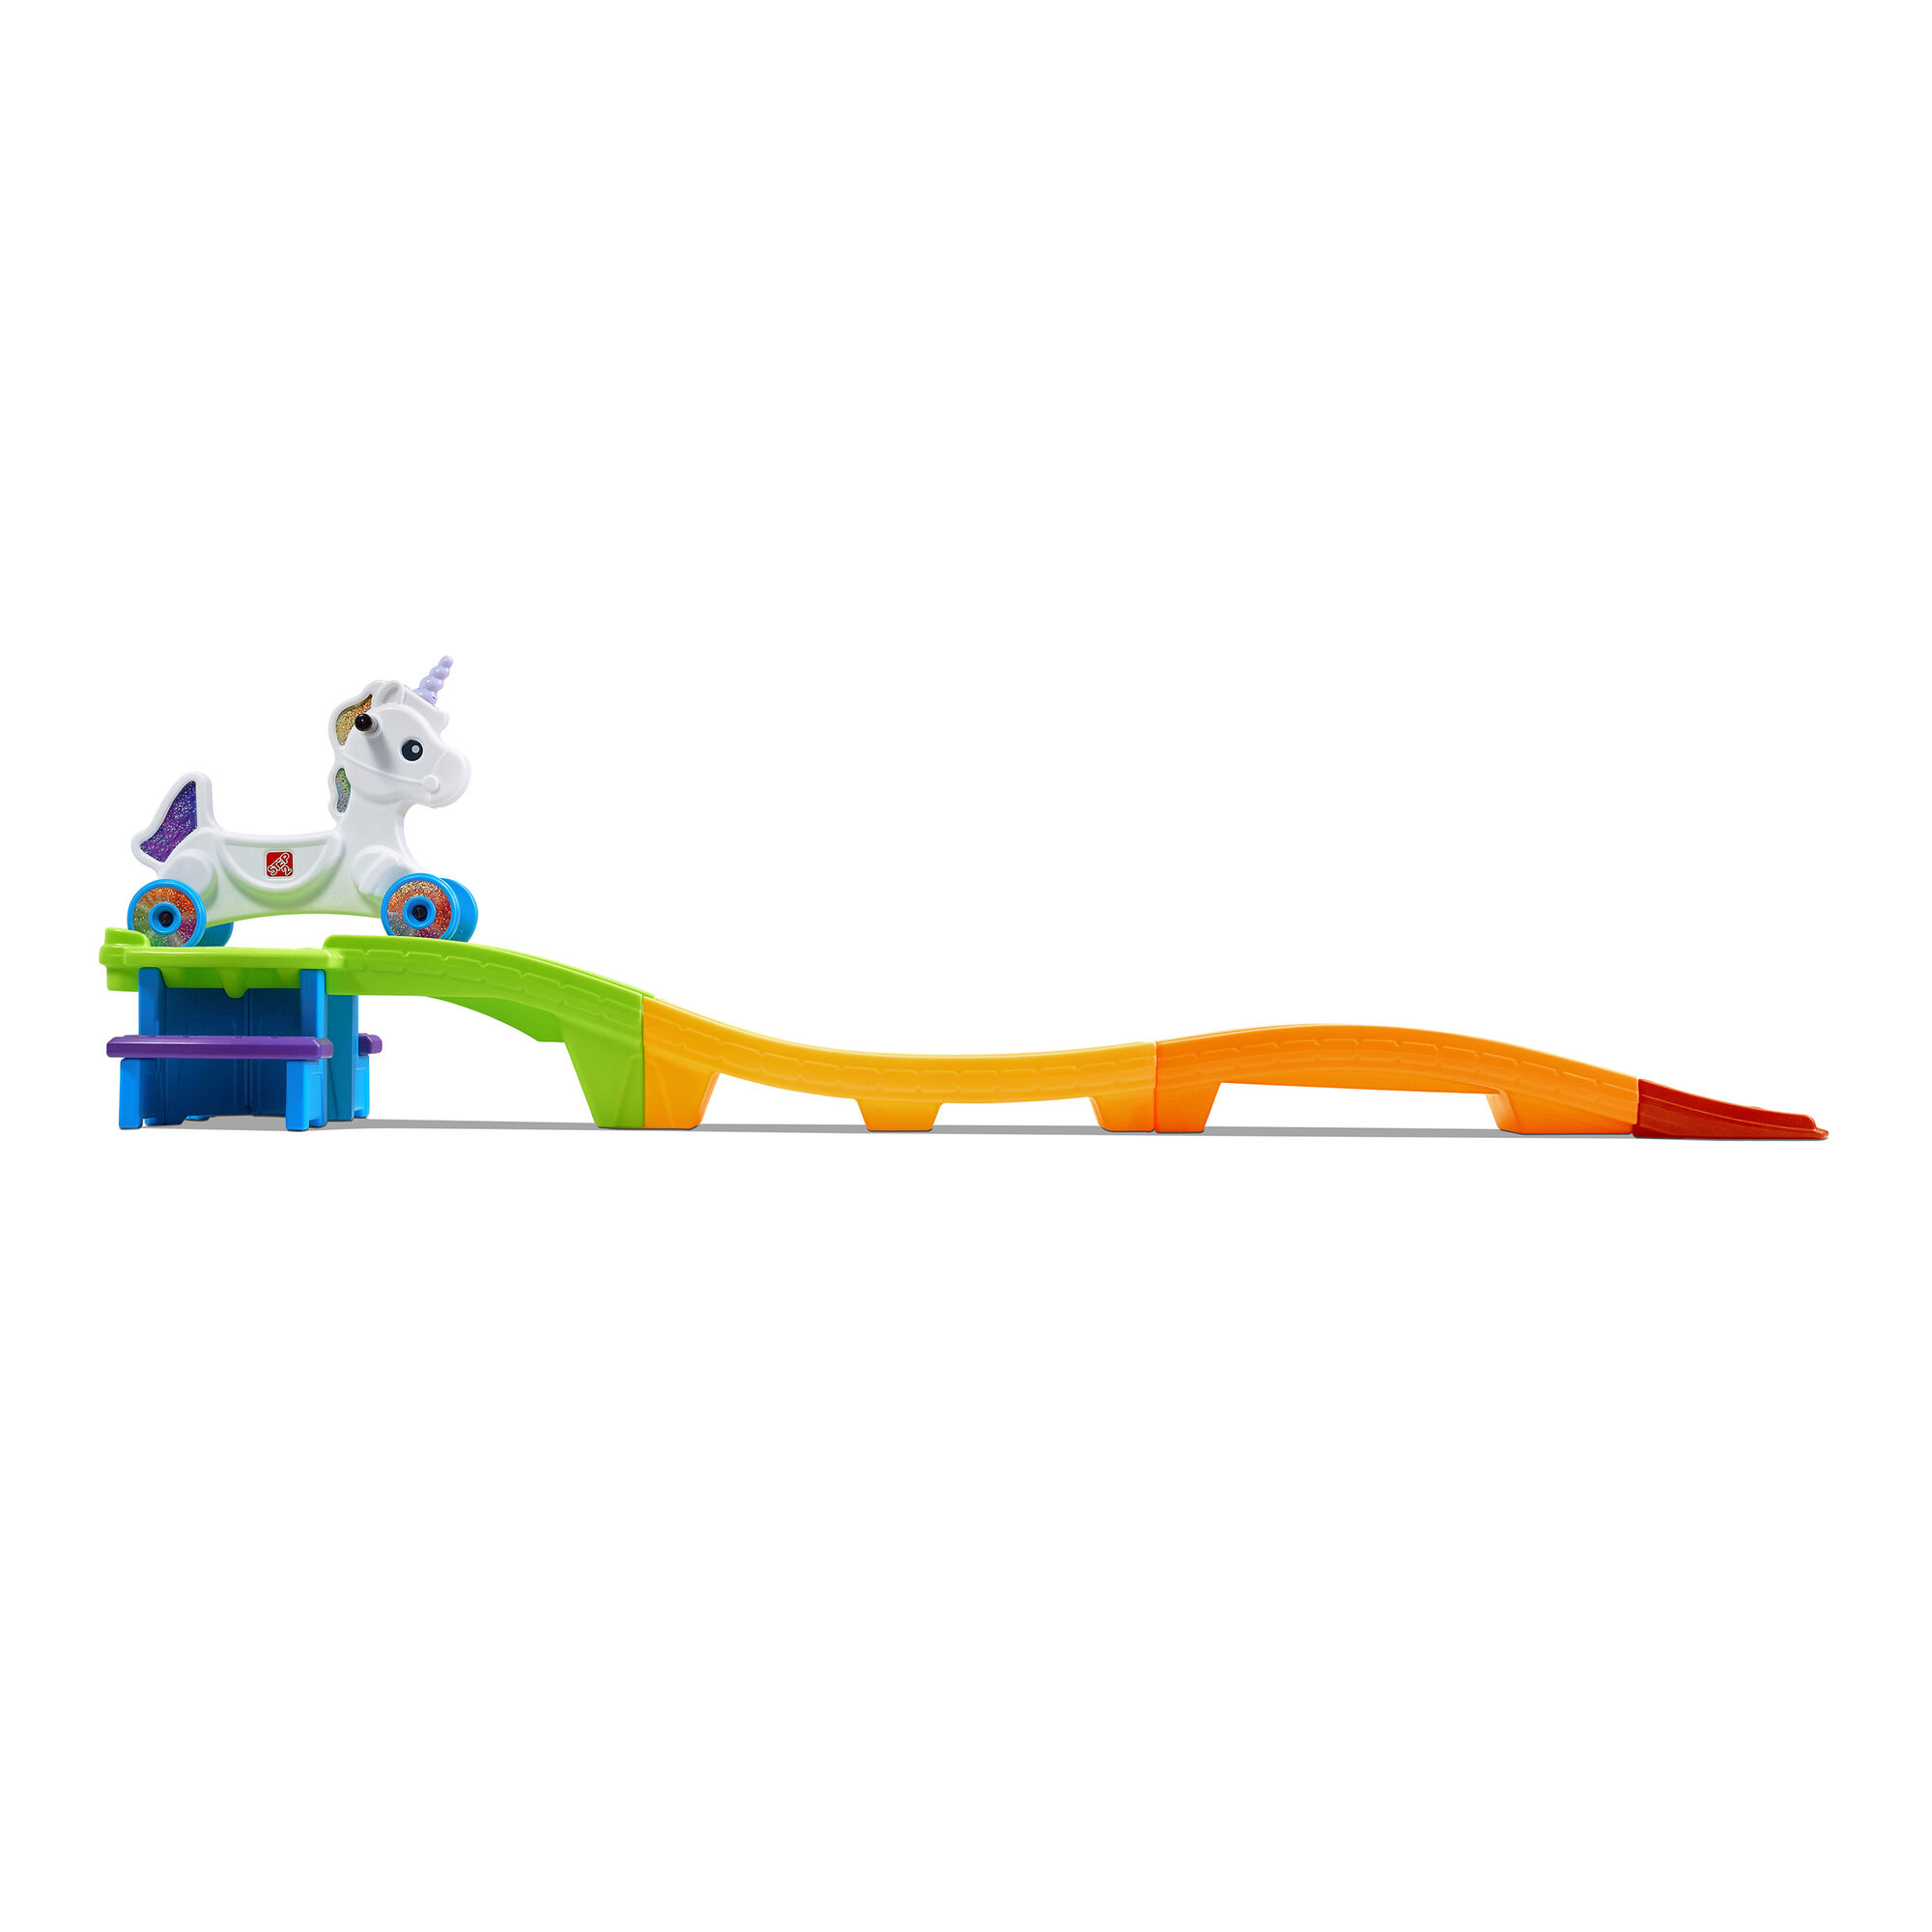 productfoto Step2 Unicorn Up & Down Roller Coaster Achtbaan